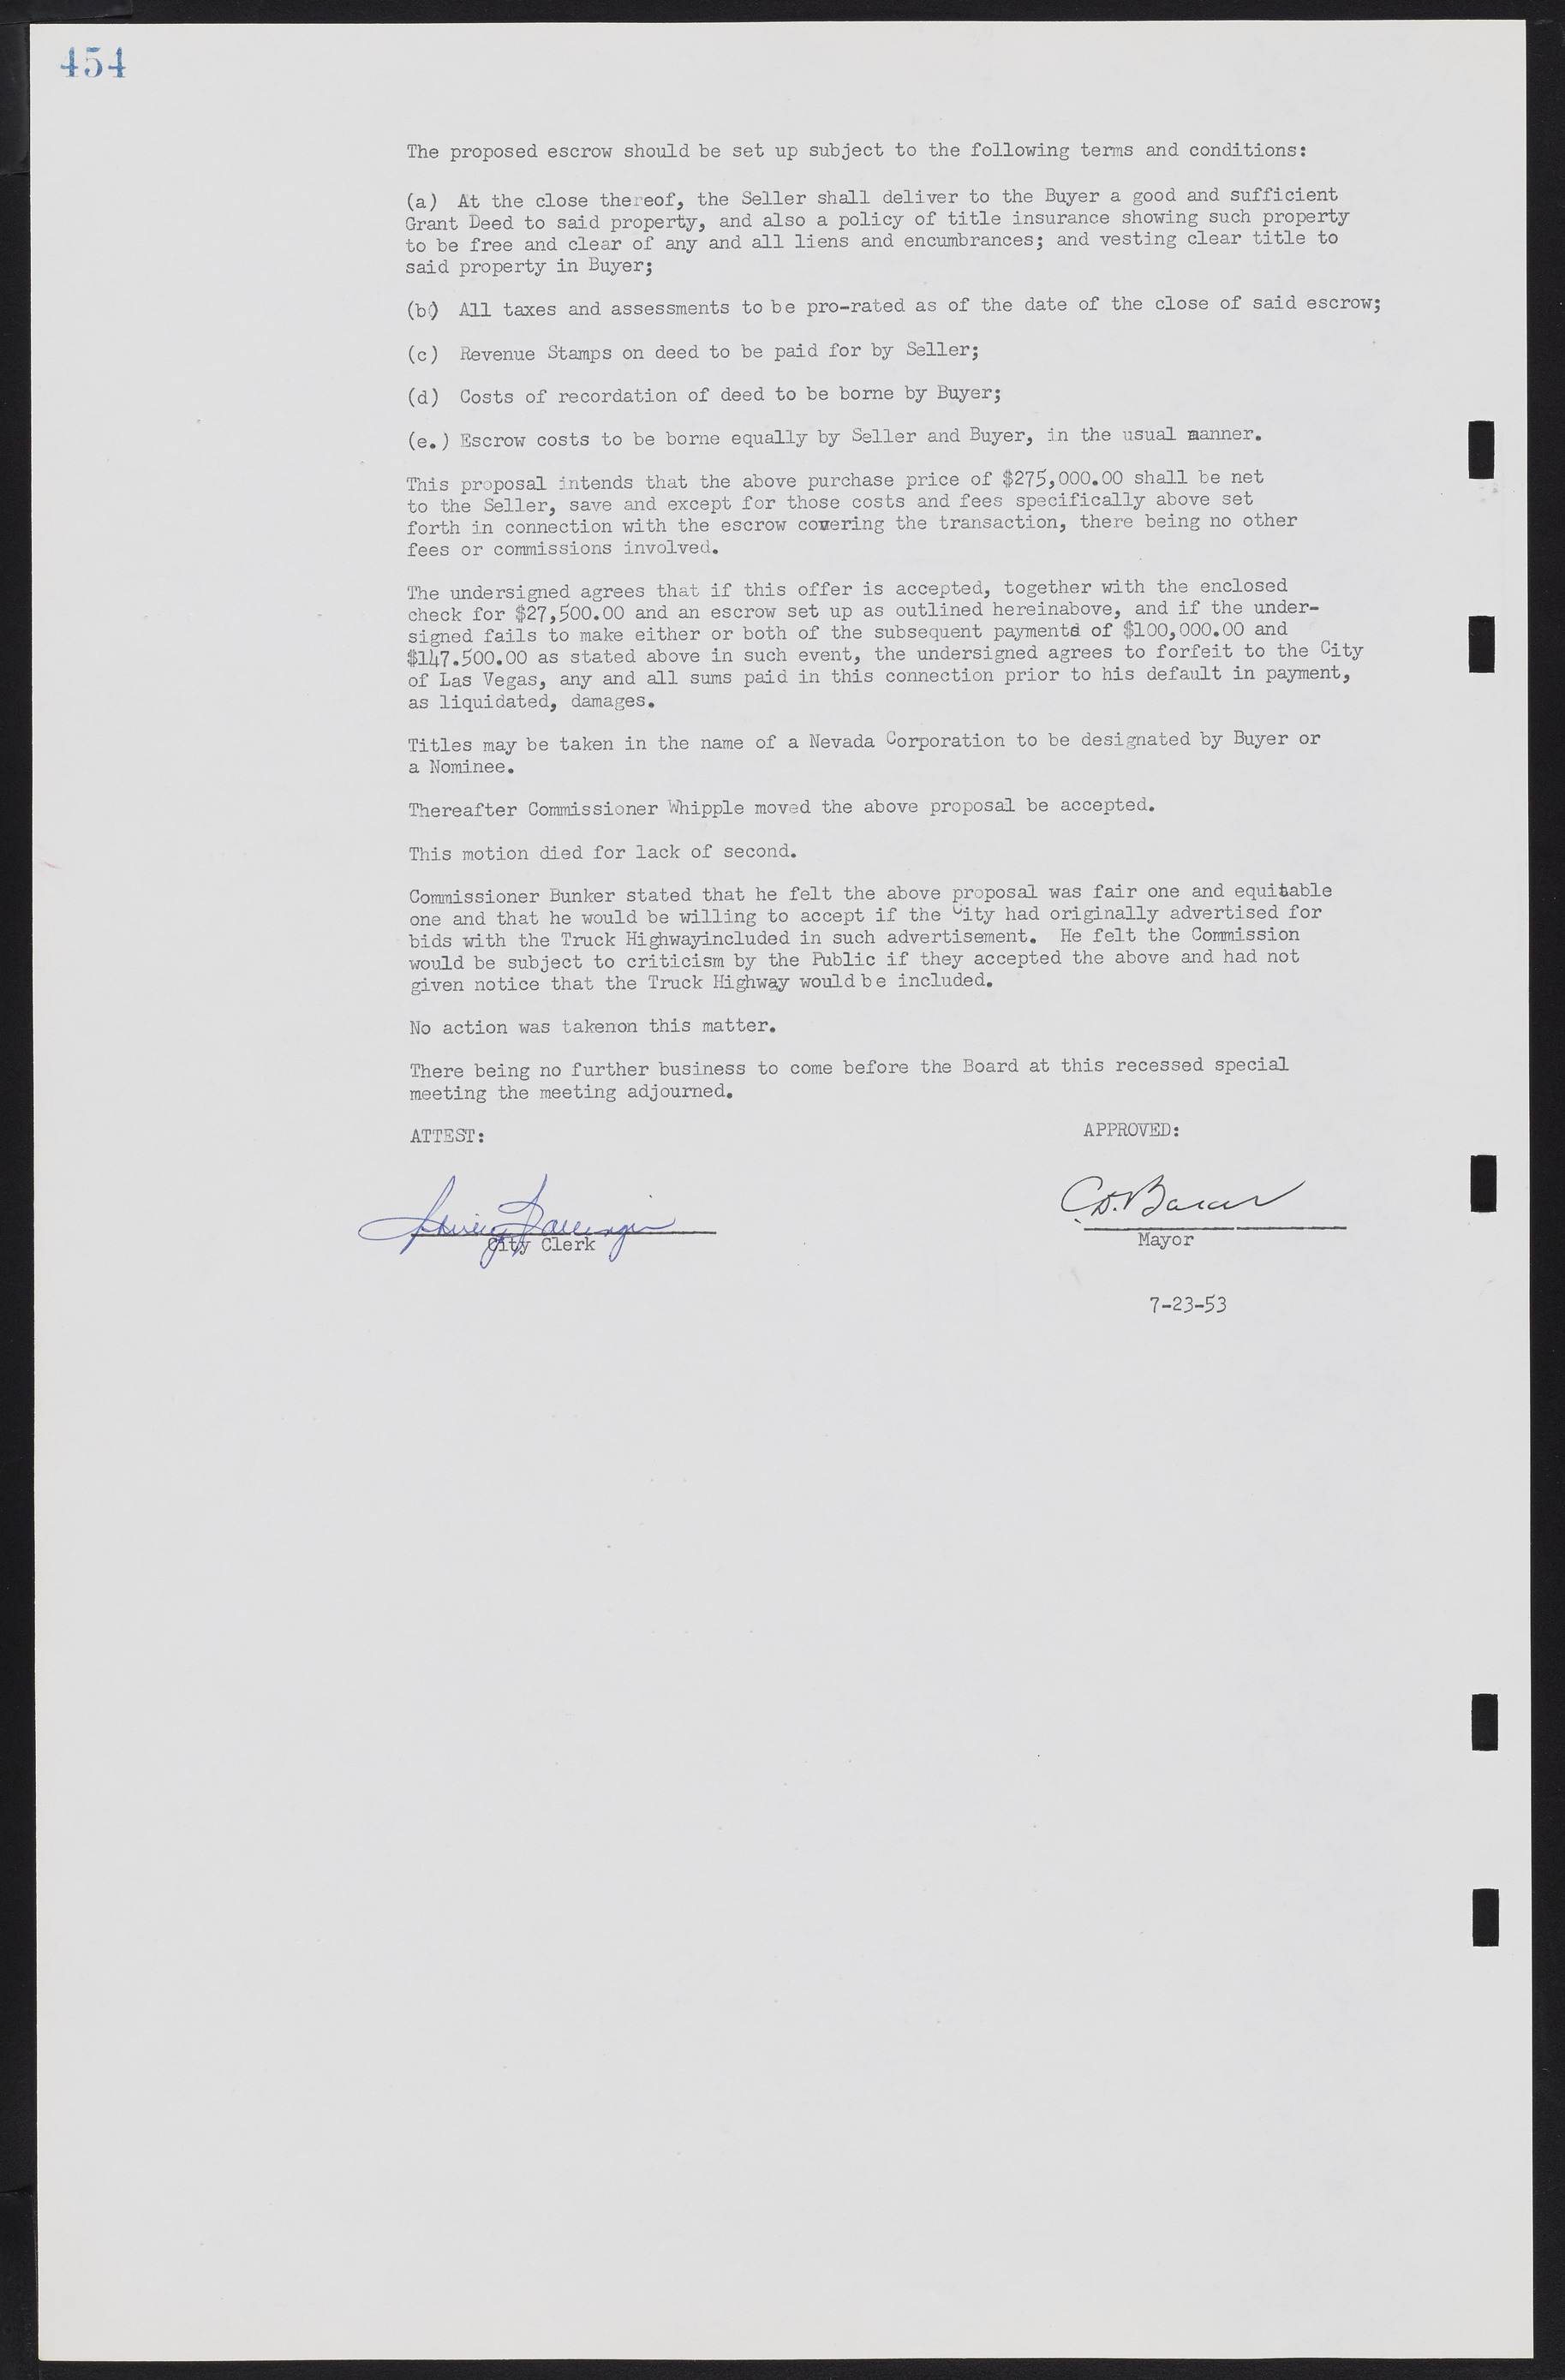 Las Vegas City Commission Minutes, May 26, 1952 to February 17, 1954, lvc000008-484